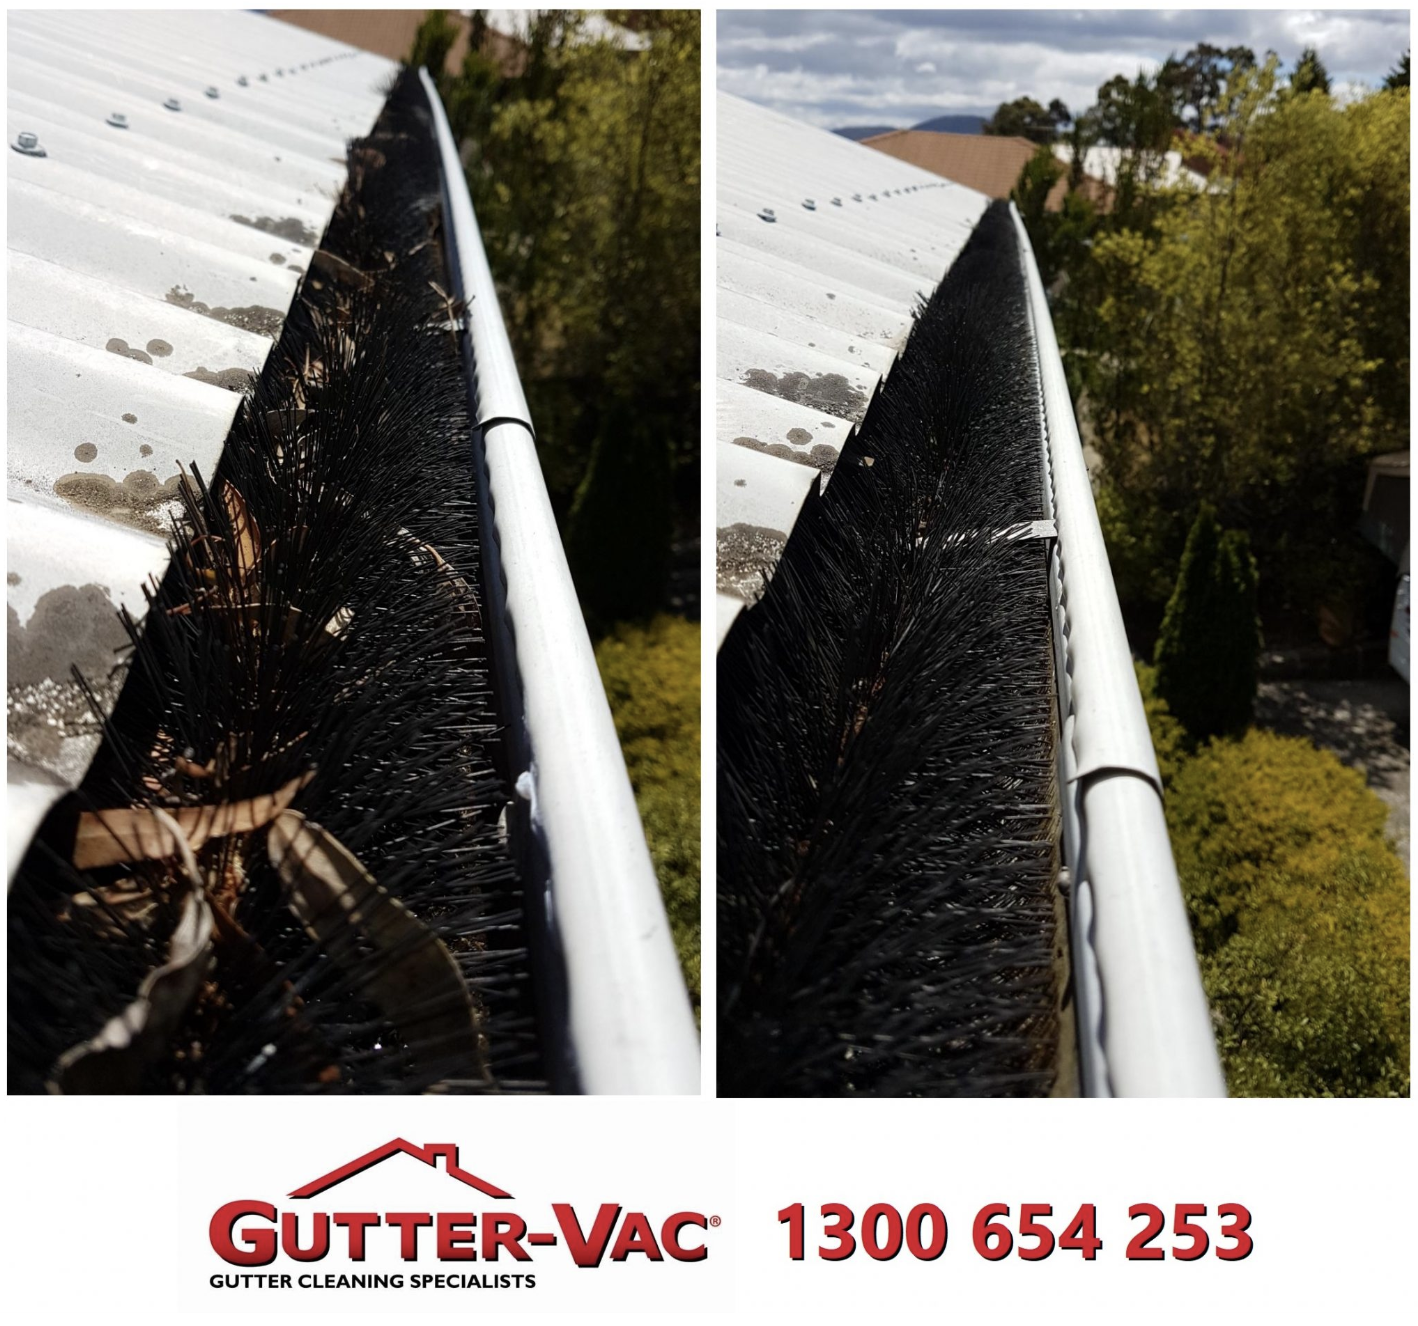 The myth about fixed gutter guards